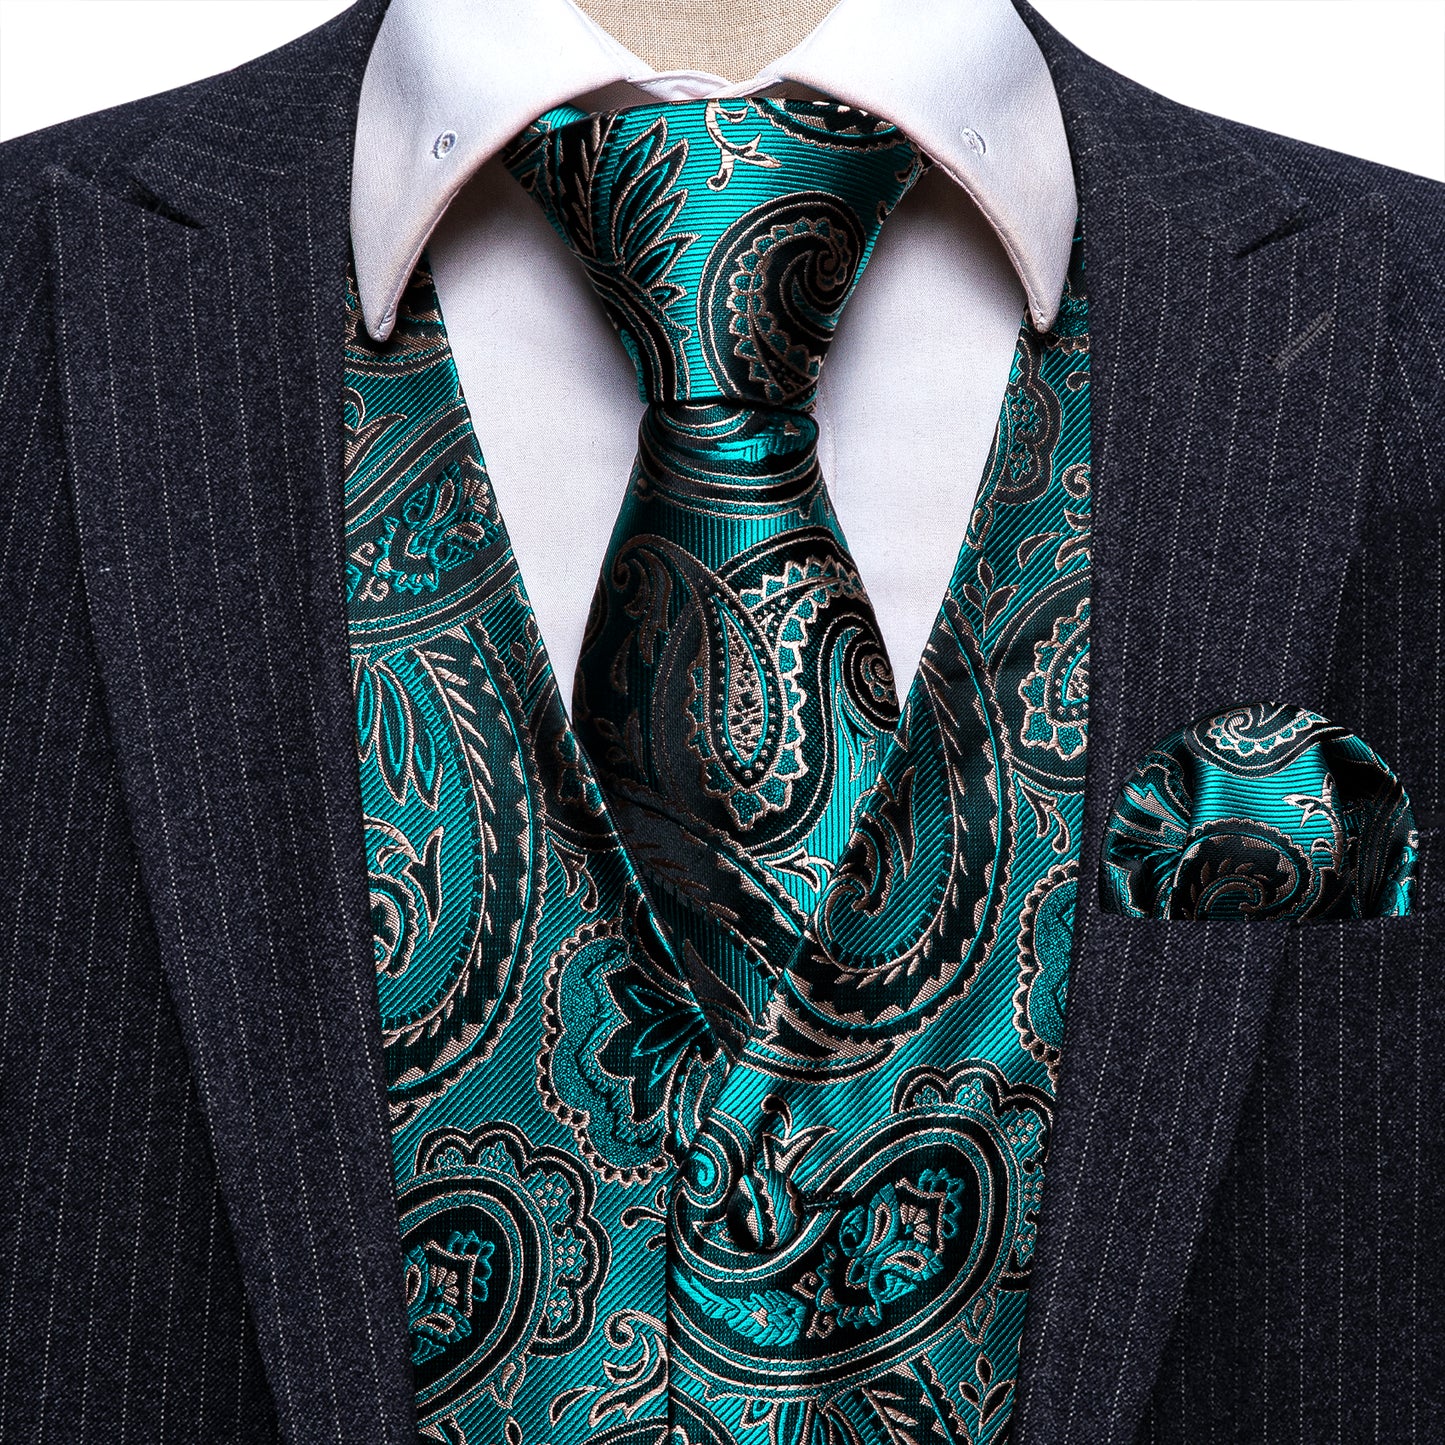 Designer Floral Waistcoat Silky Novelty Vest Paisley Teal Whales